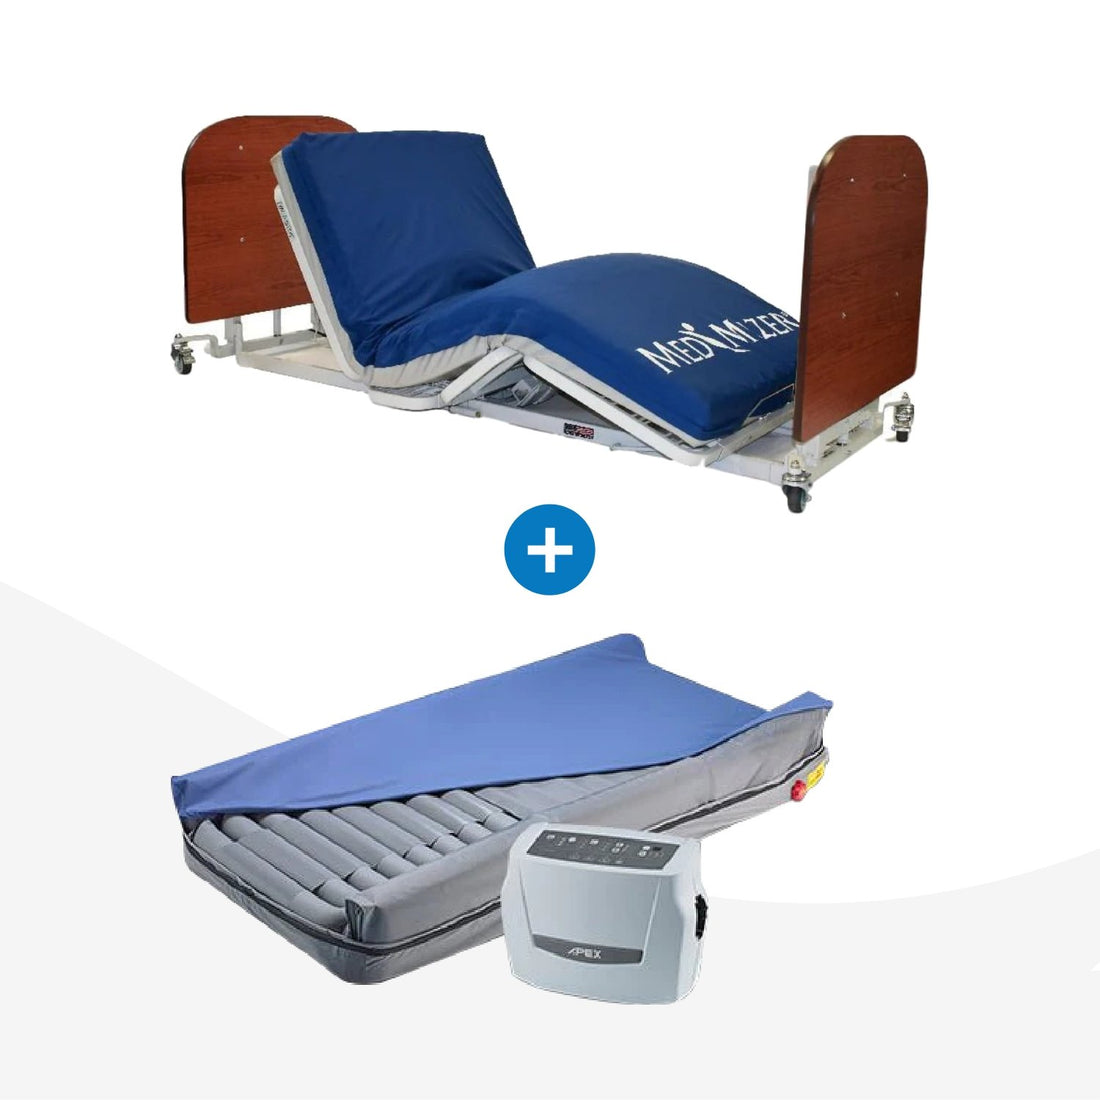 How Lateral Rotation Mattresses Help Patients with Various Conditions - Wound Care Mattress